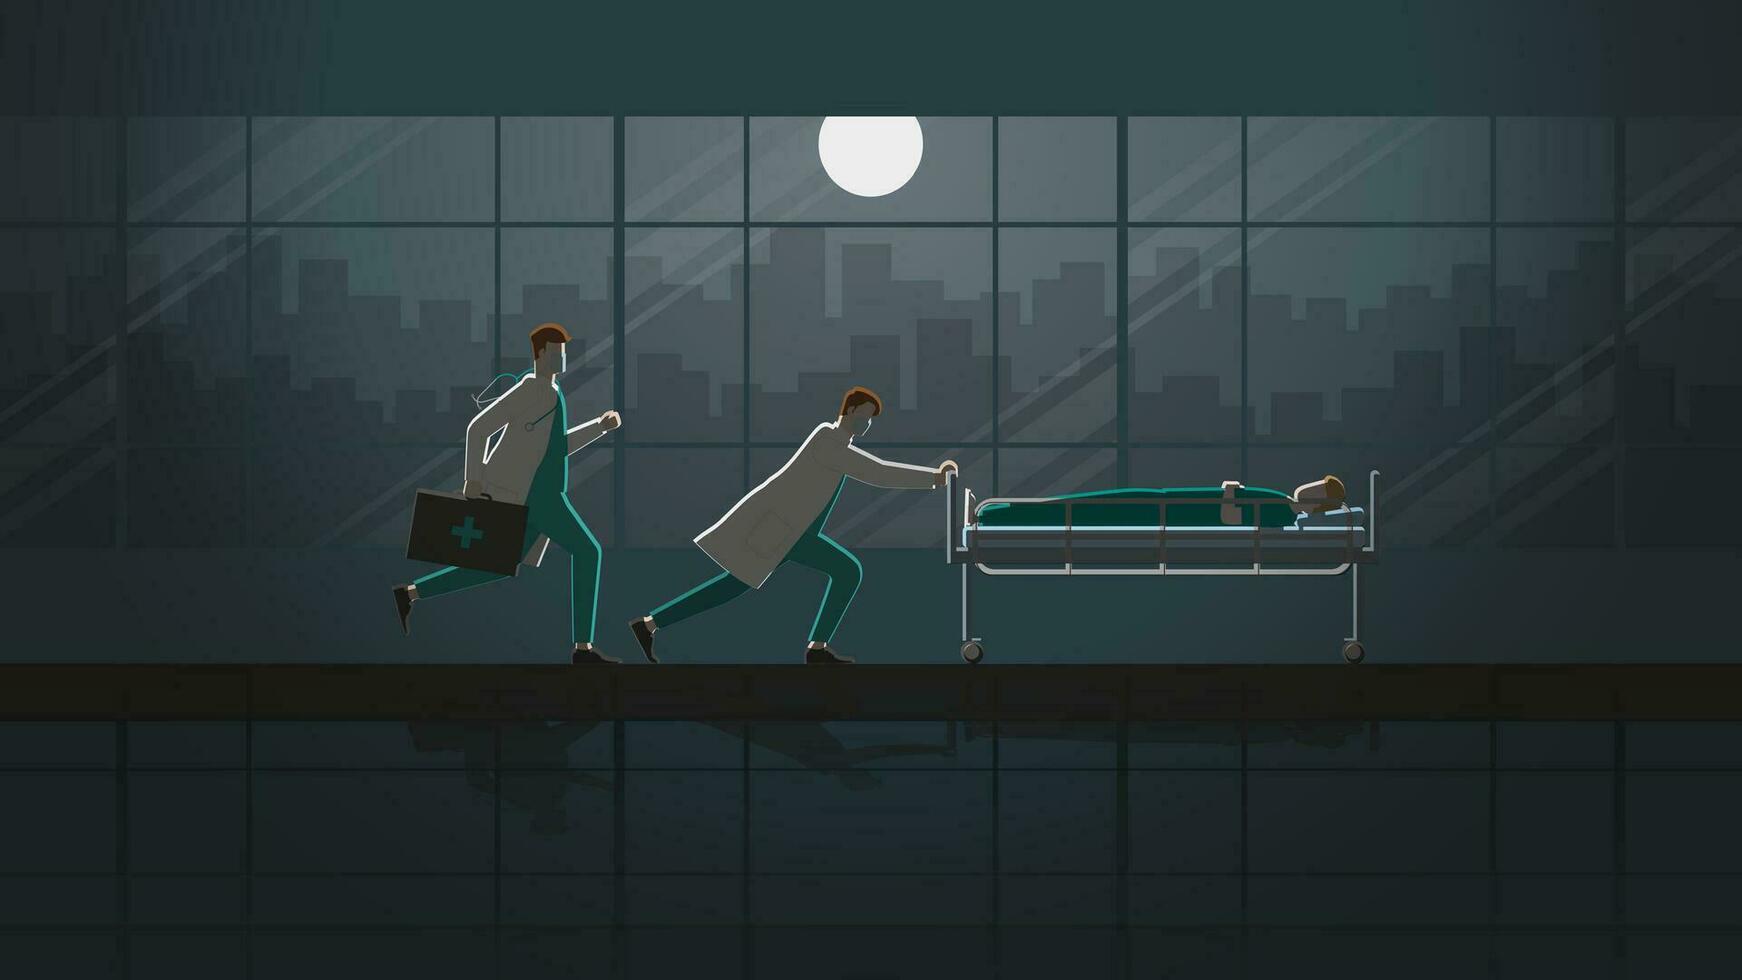 wo doctors run and push sick patient sleep on bed in hospital ward at night vector